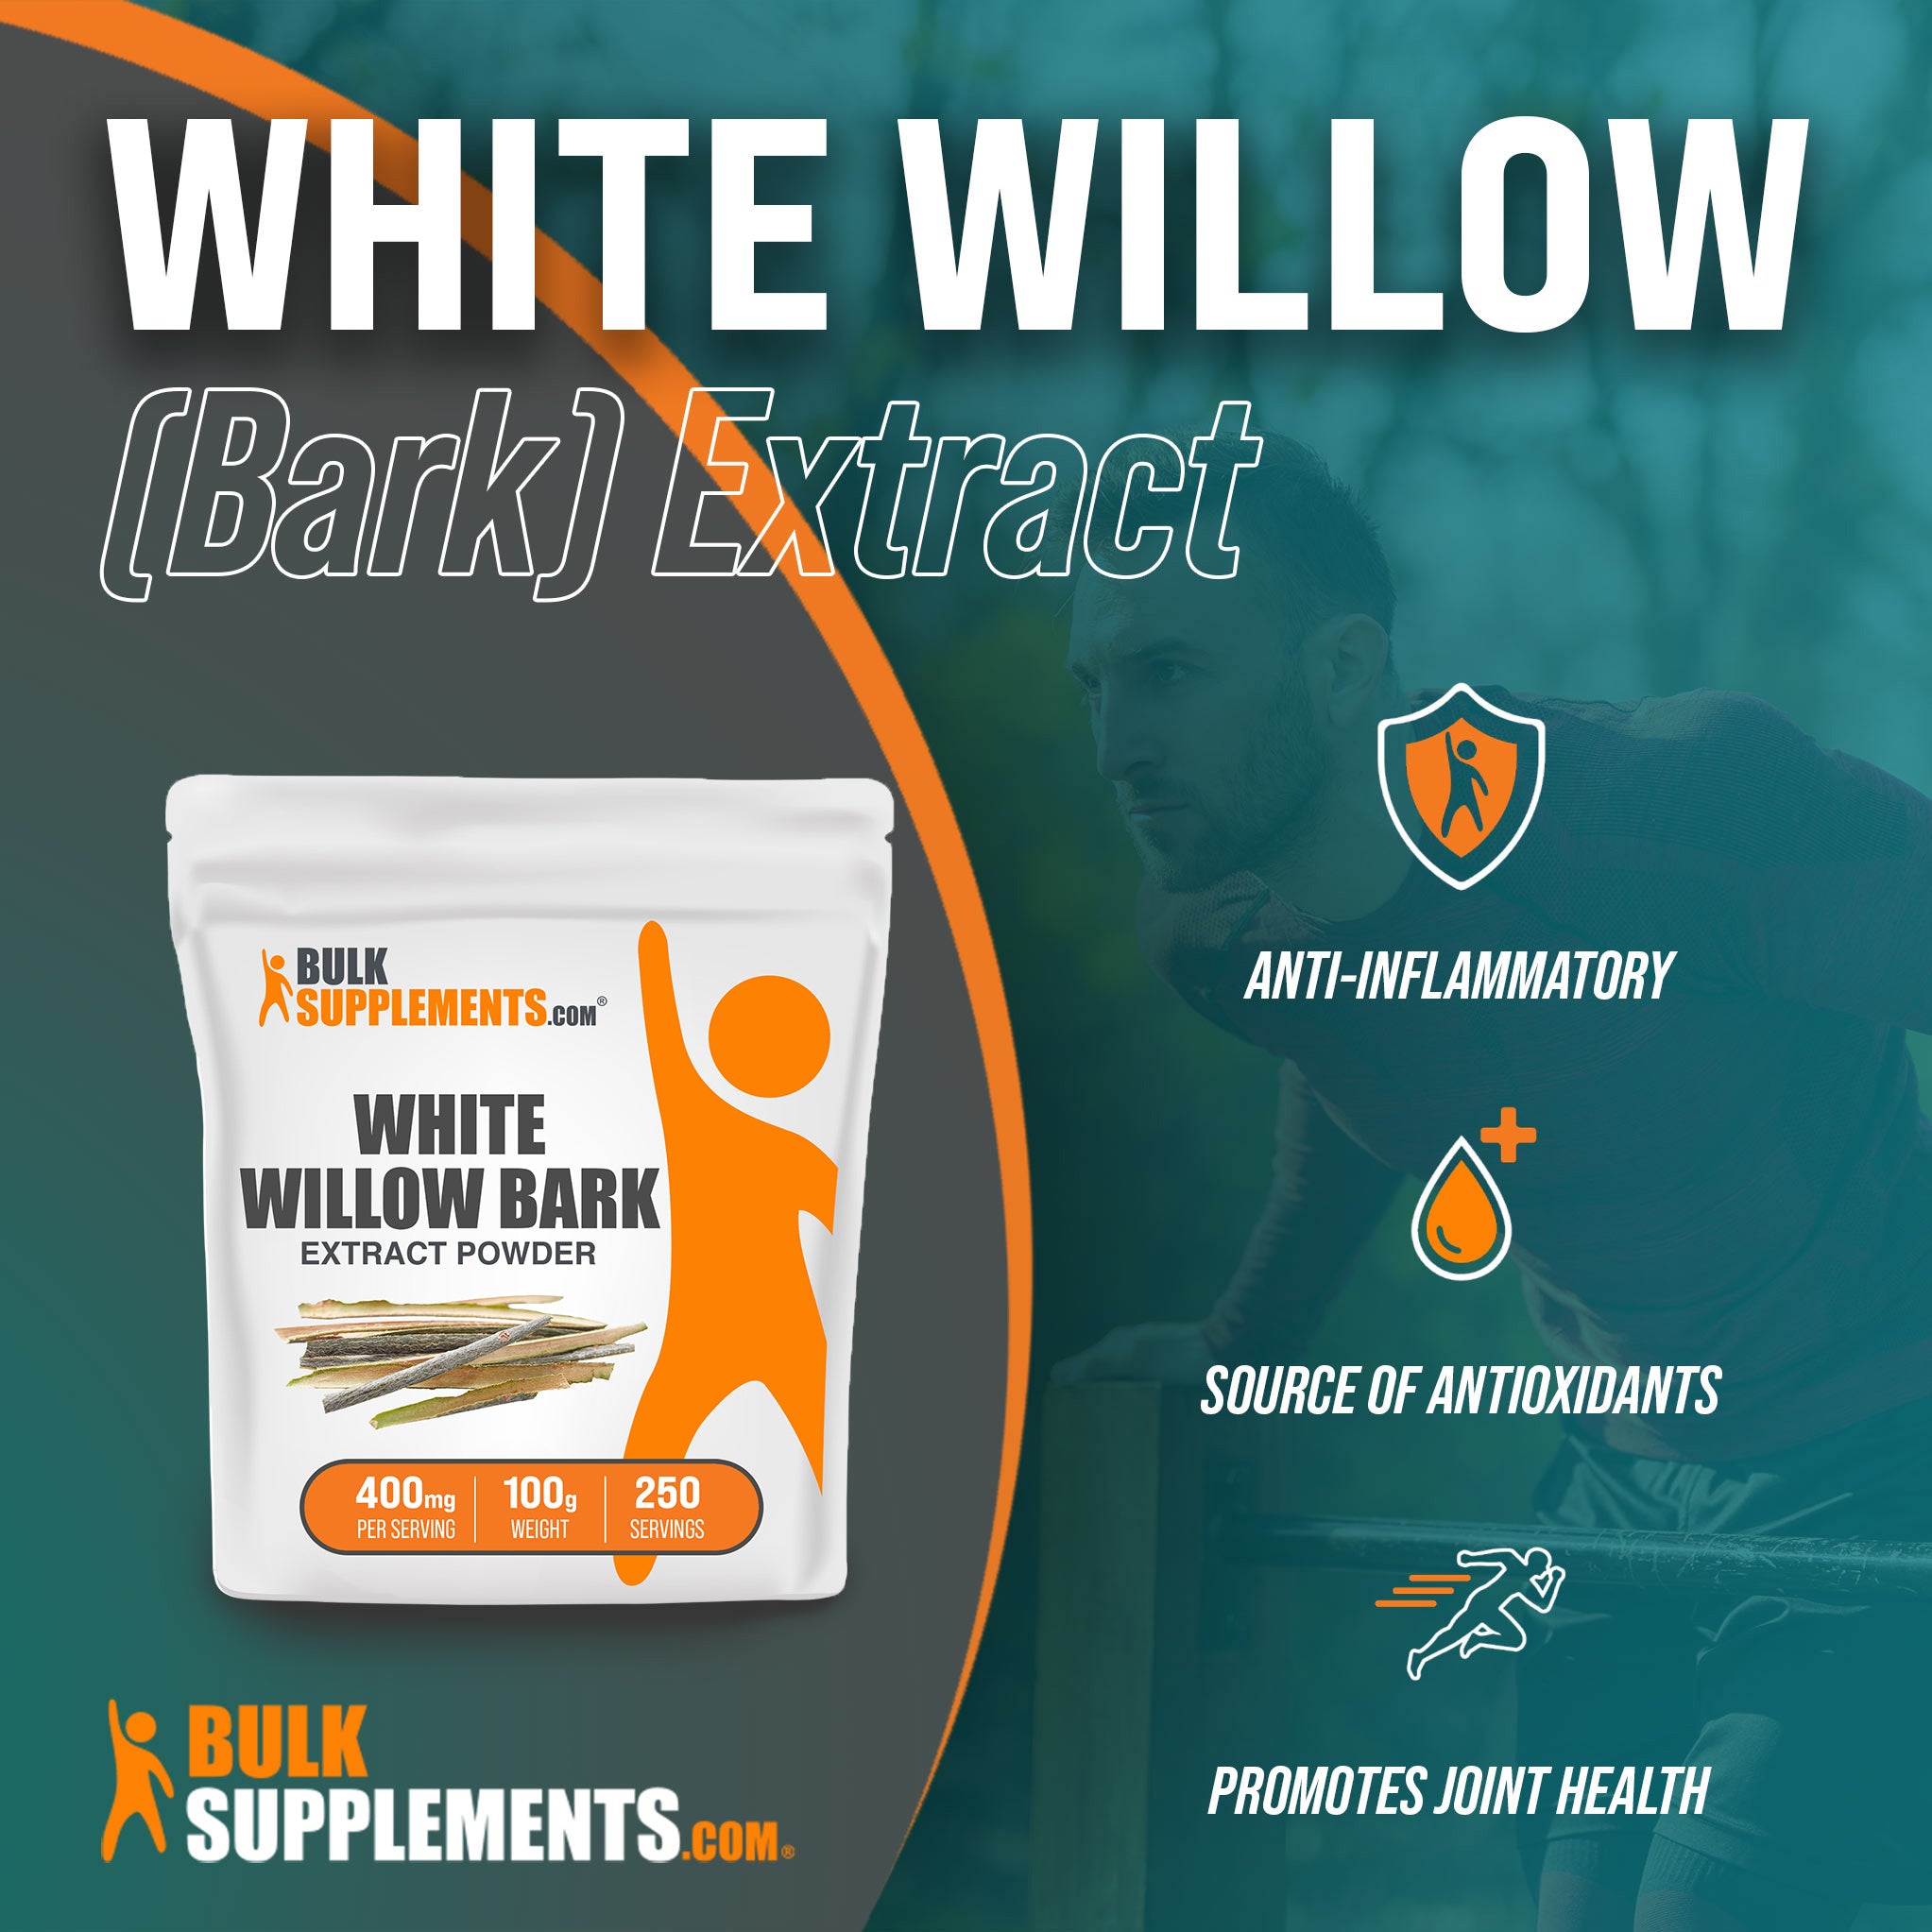 Benefits of White Willow Bark Extract: anti-inflammatory, source of antioxidants, promotes joint health